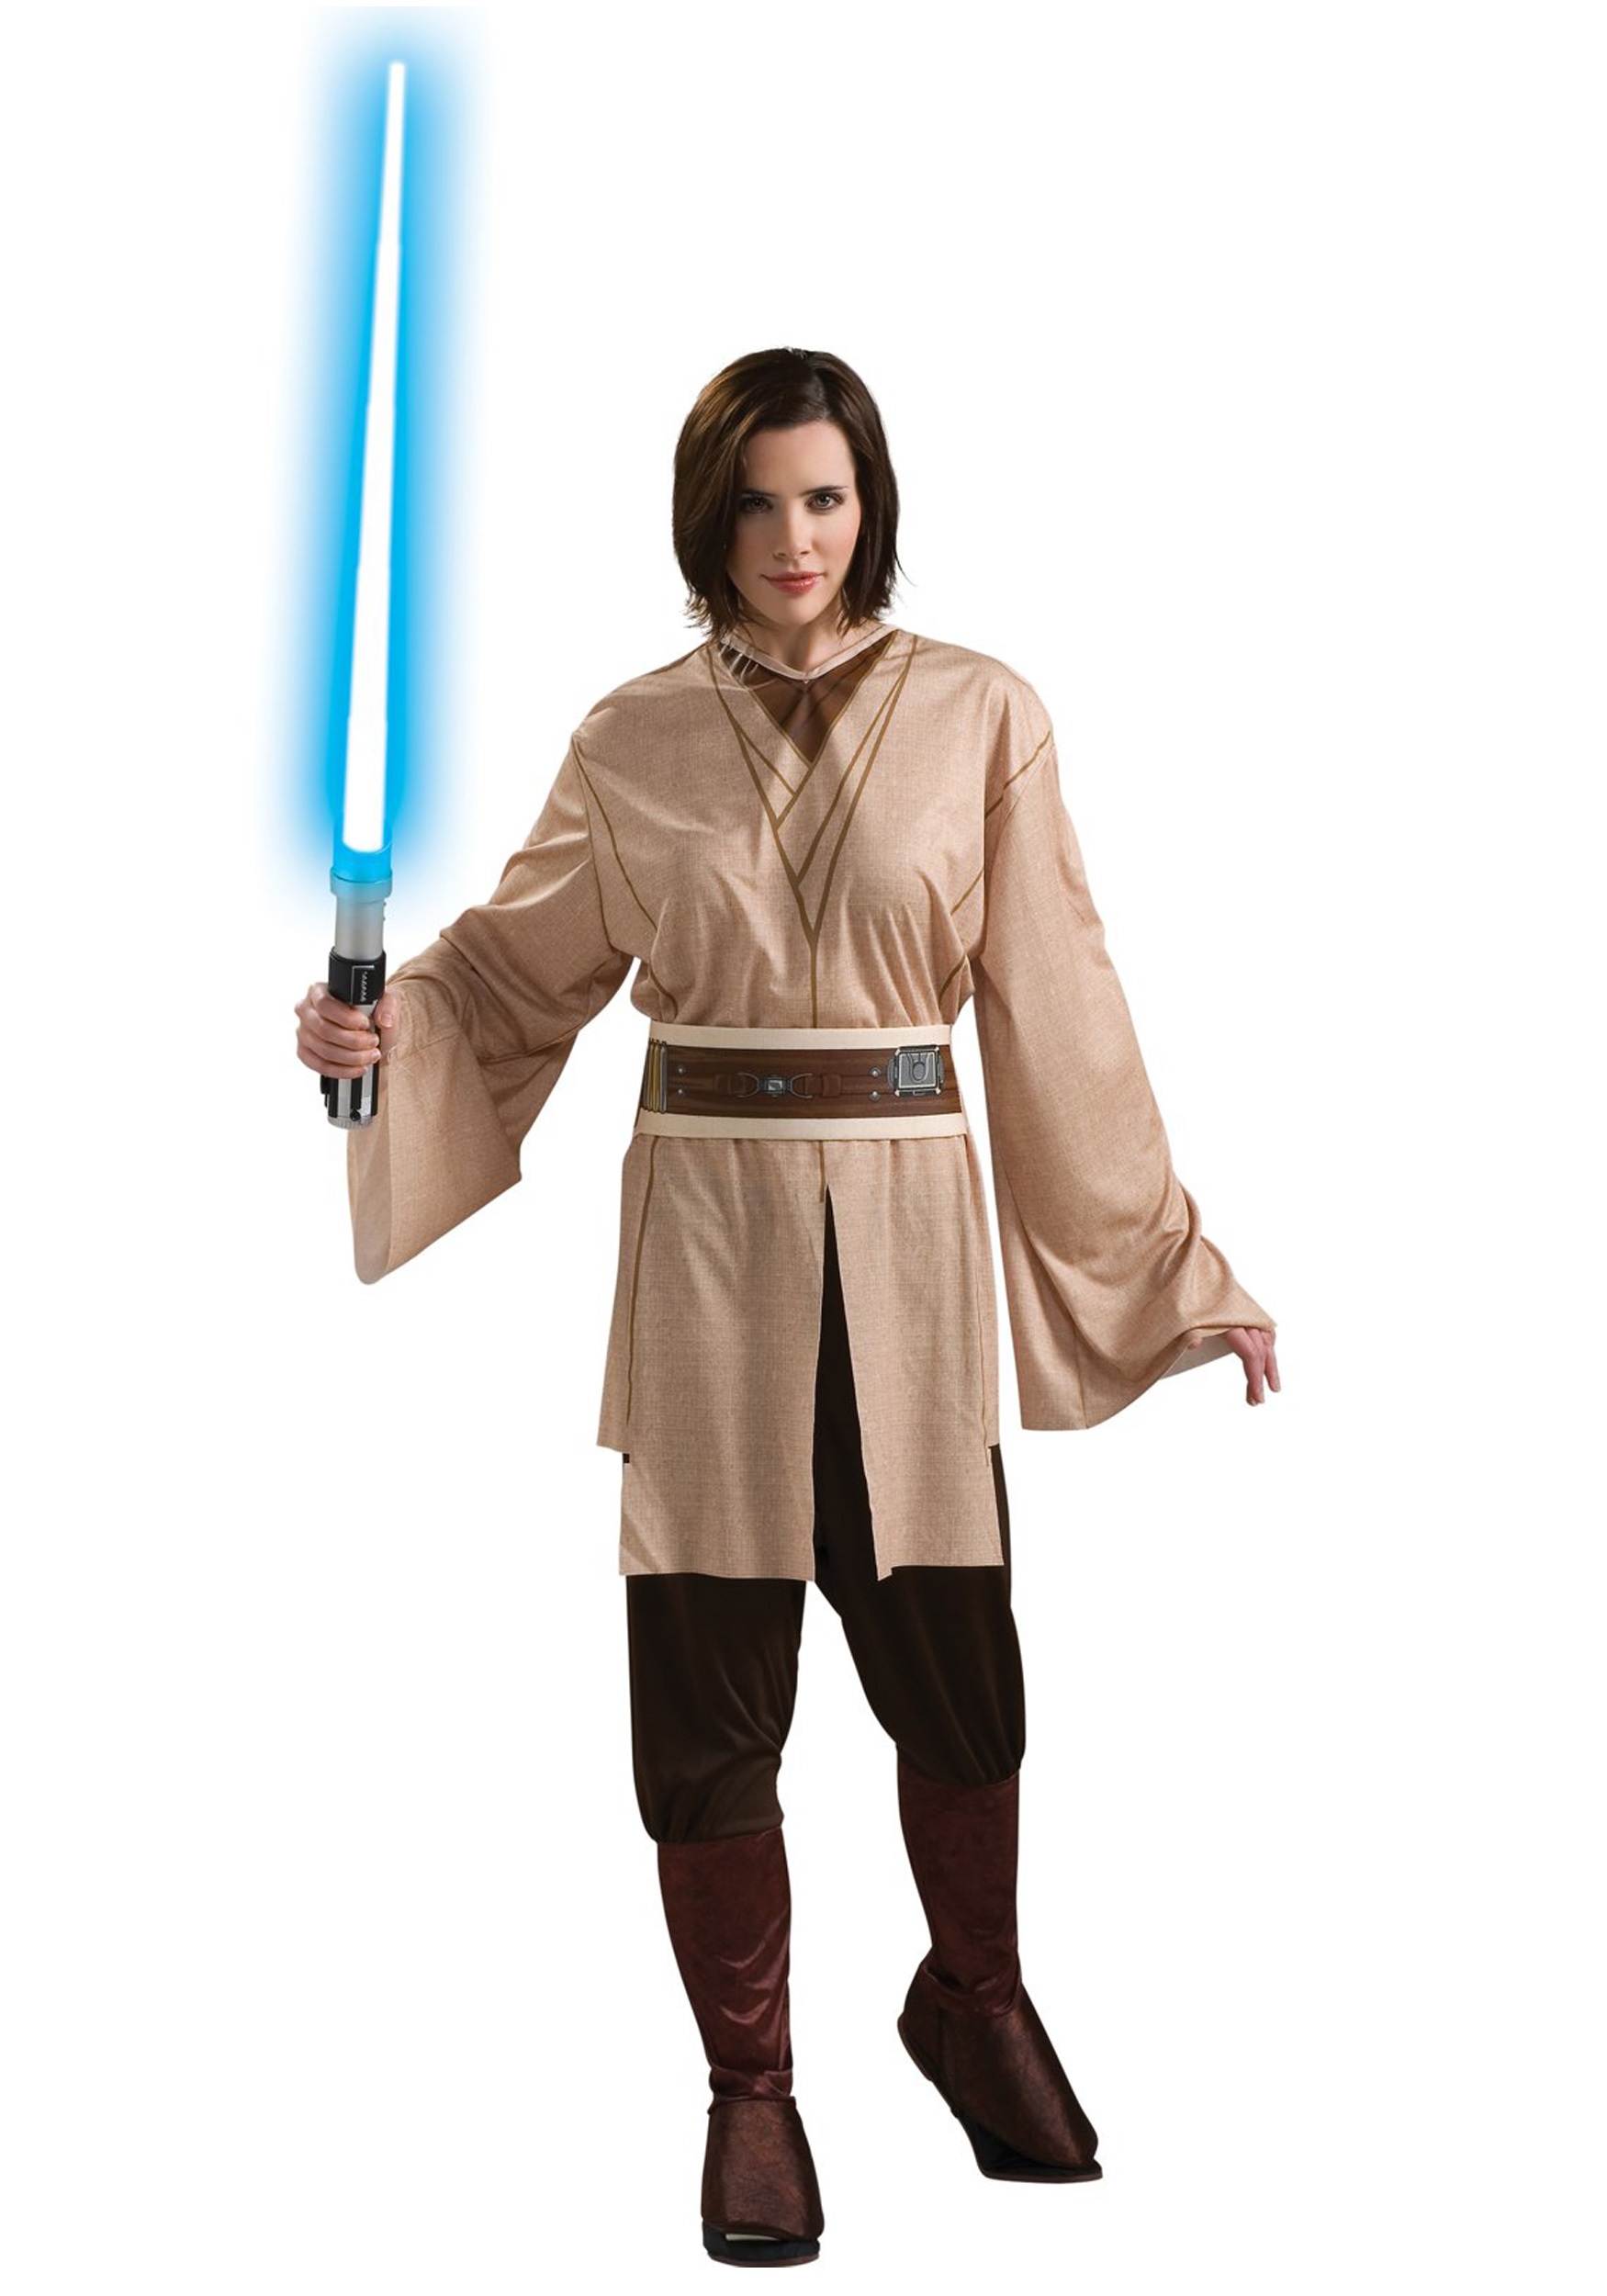 Share more than 147 jedi knight dressing gown